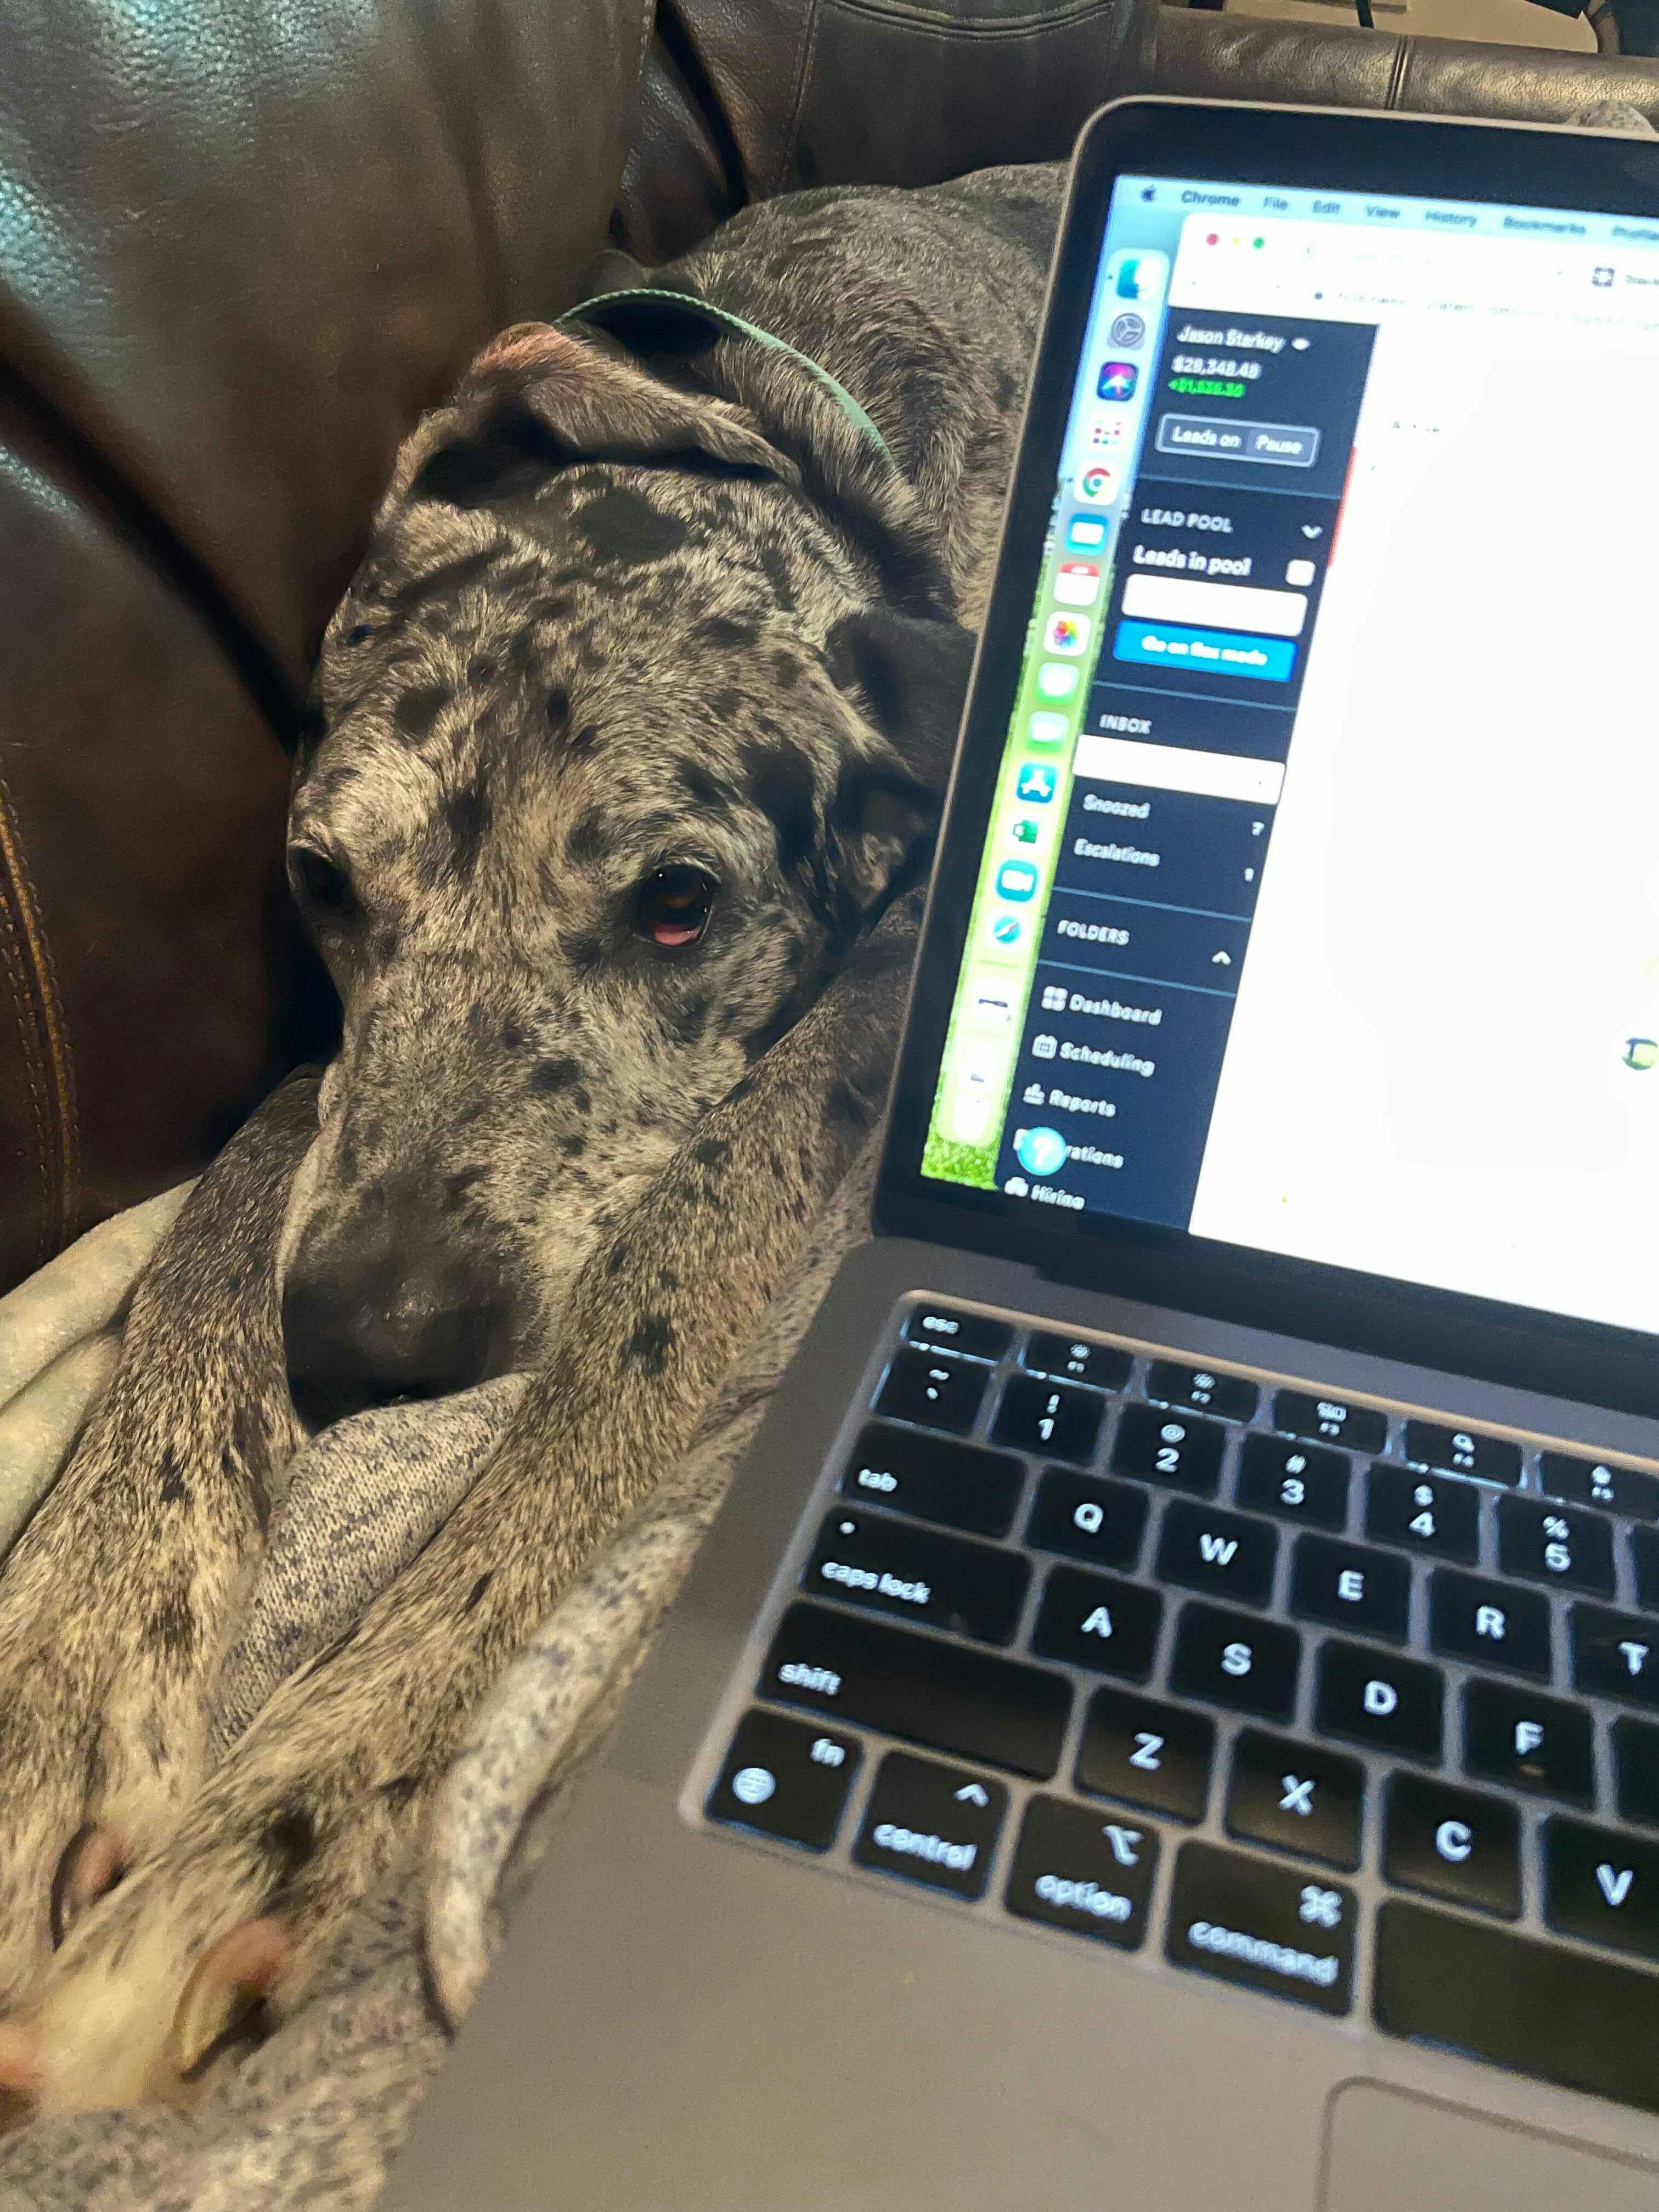 A laptop opened on the author's lap while they sit on the couch with their dog's face squeezing between the laptop and the back of the couch to lay next to his owner.